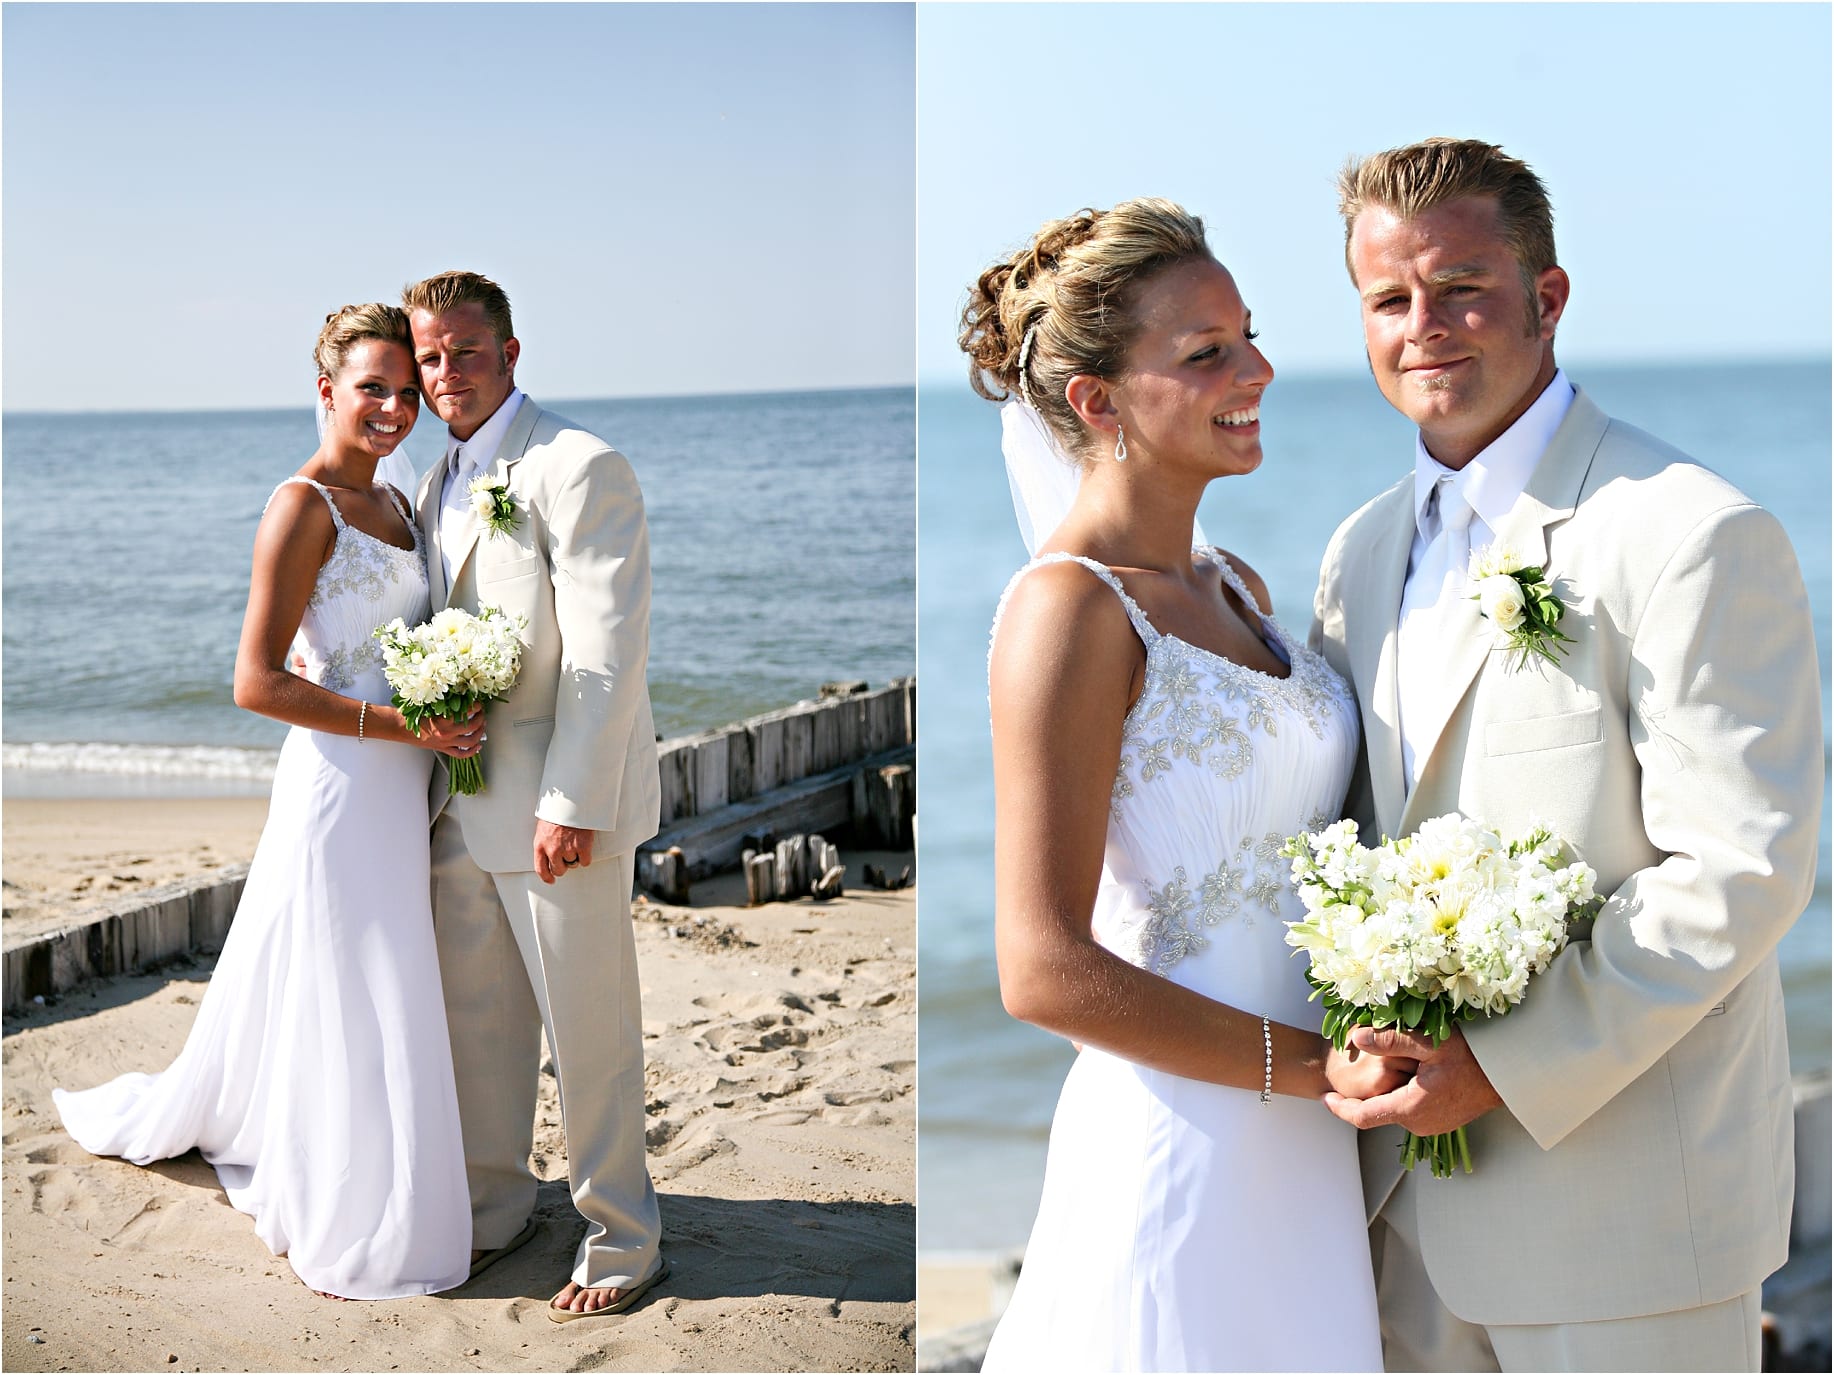 Beach wedding with tan suit and white flowers